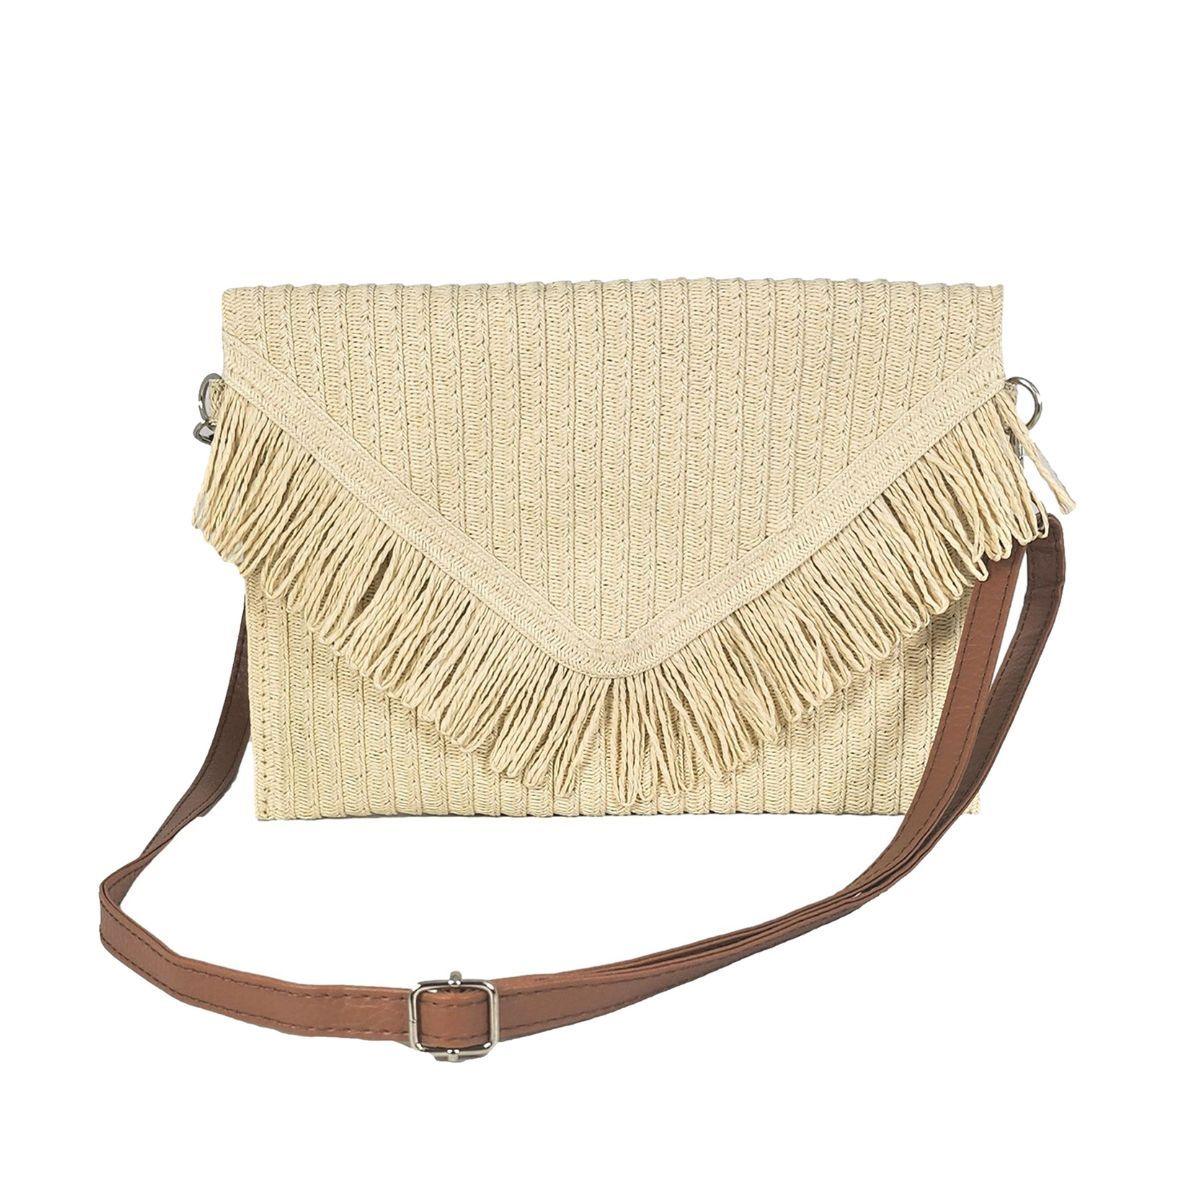 Stylish Cream Fringe Clutch Shoulder Bag - Perfect Accessory for Any Outfit!